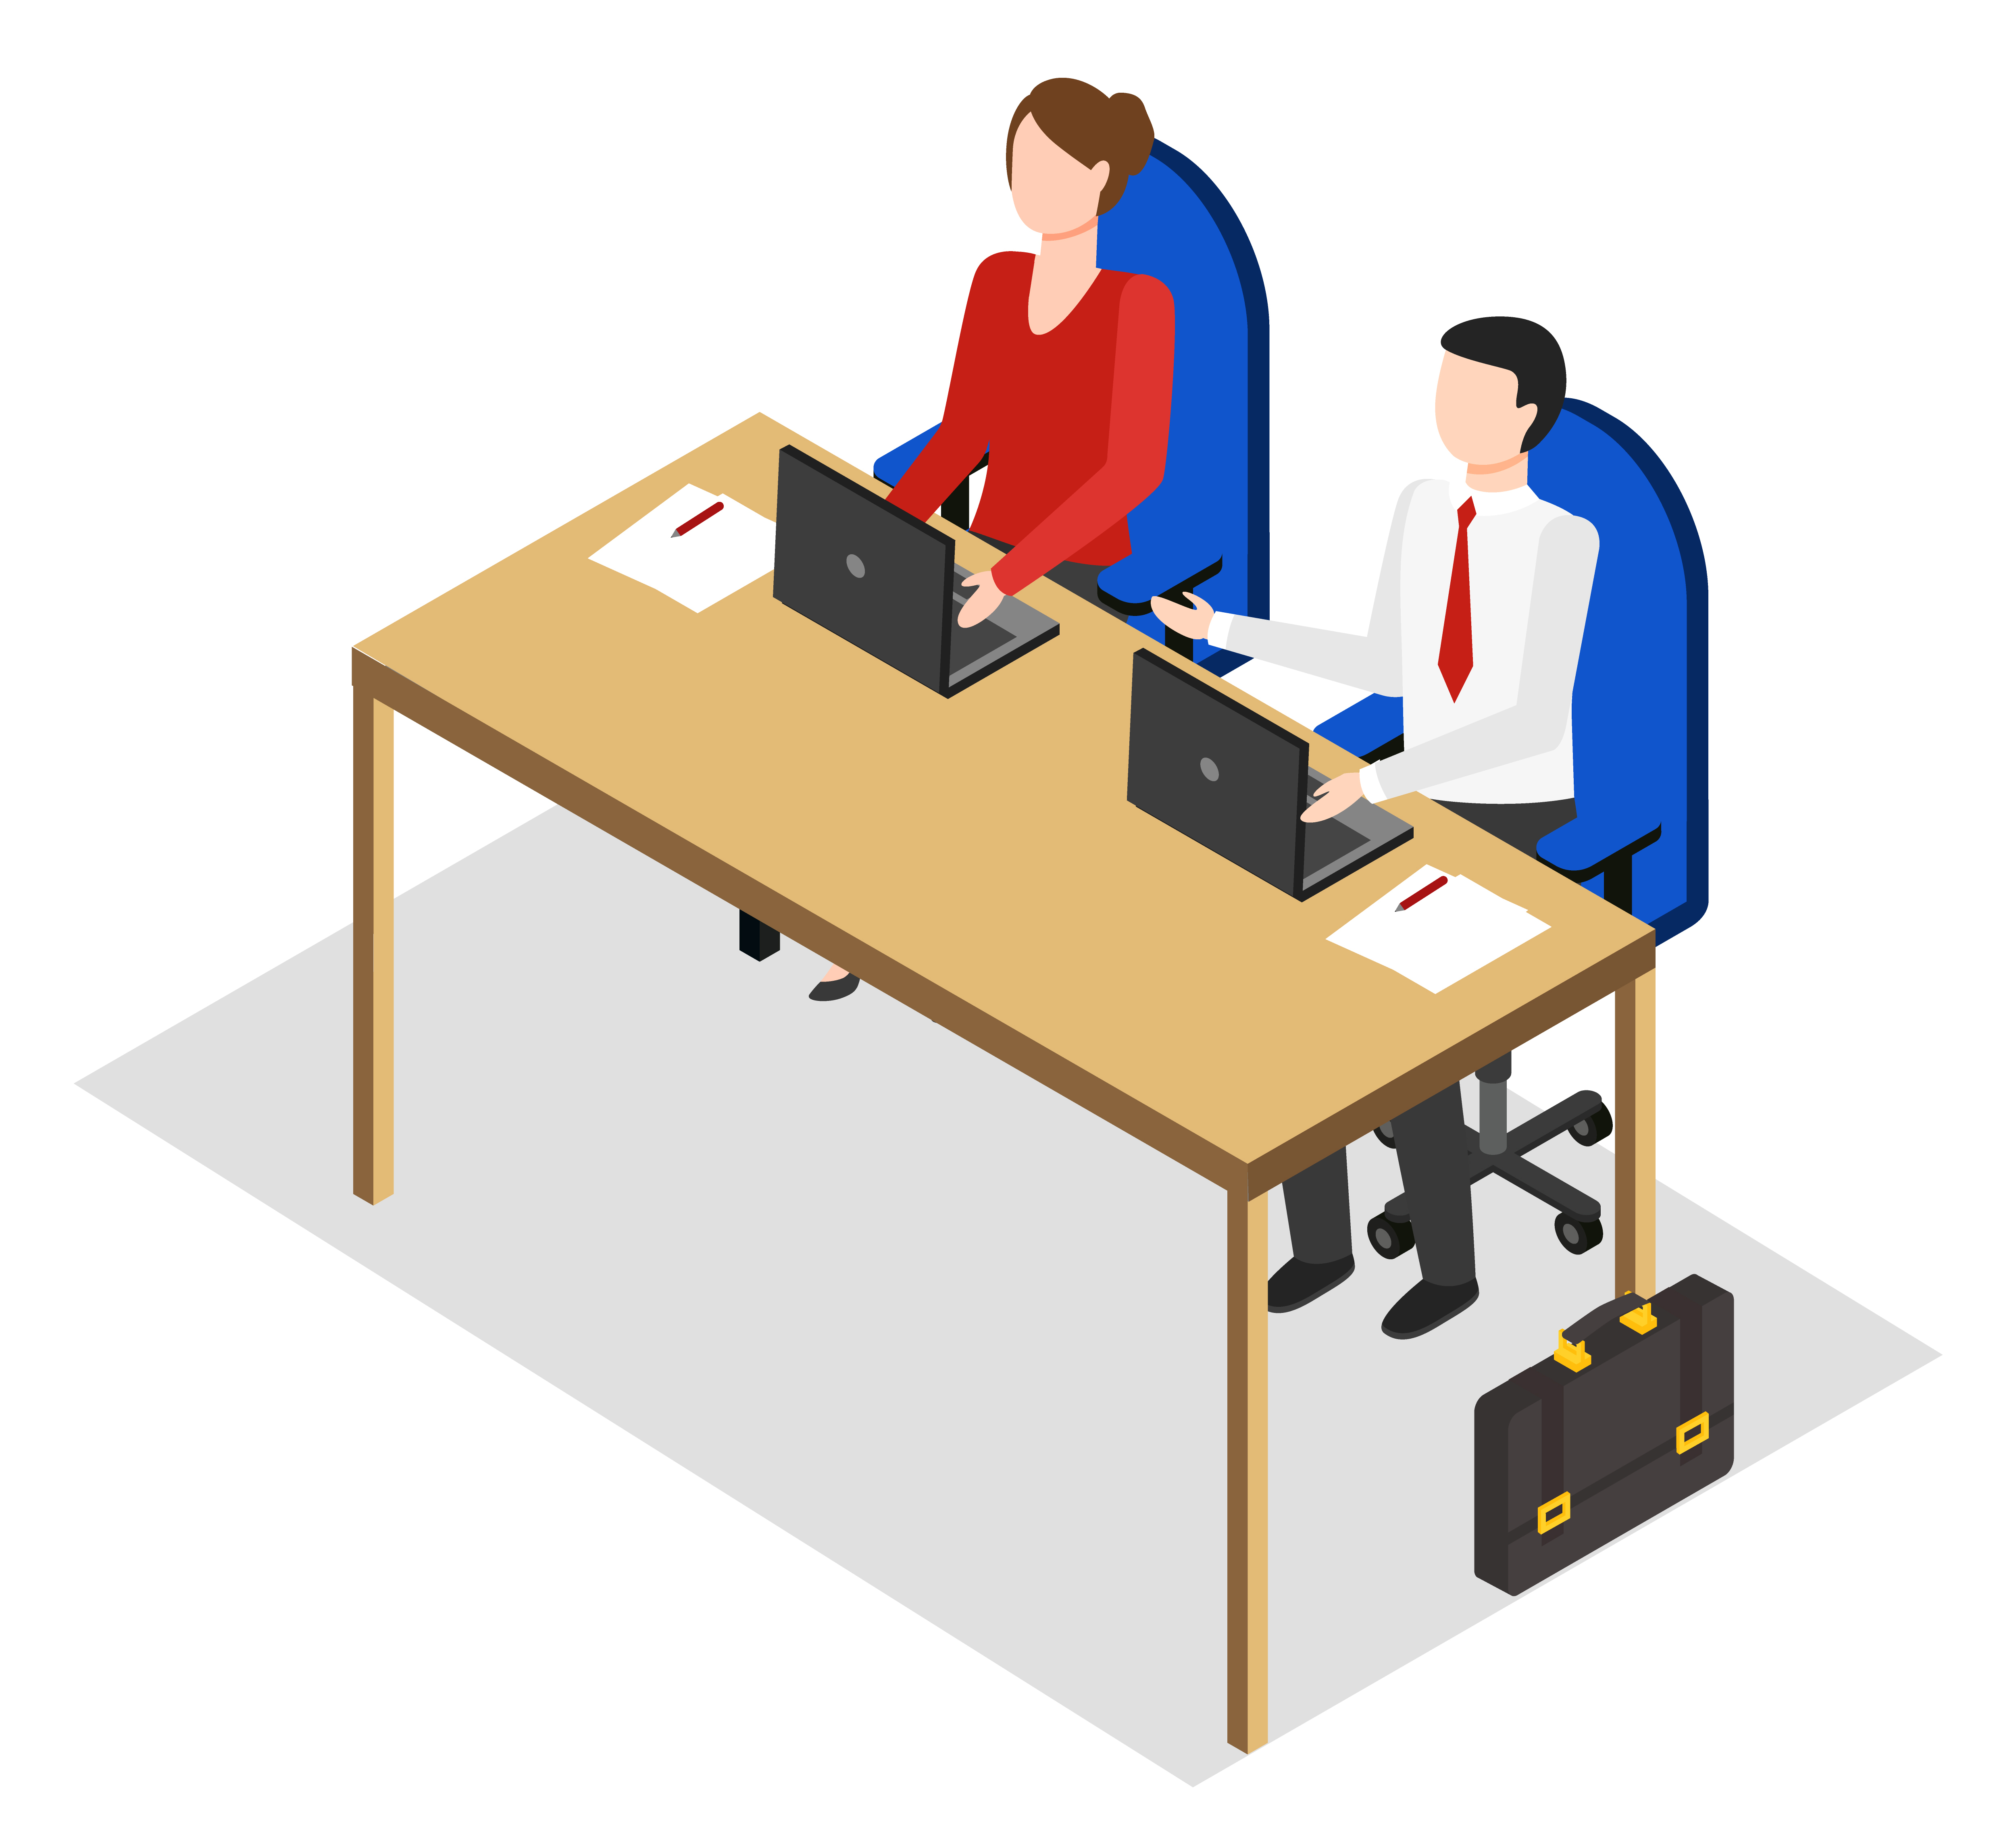 Managers or employees working in office sharing table. People at work dealing with data analysis or info input. Isolated male and female characters with laptops. Vector in isometric 3D style. Male and Woman Working by One Table in Office